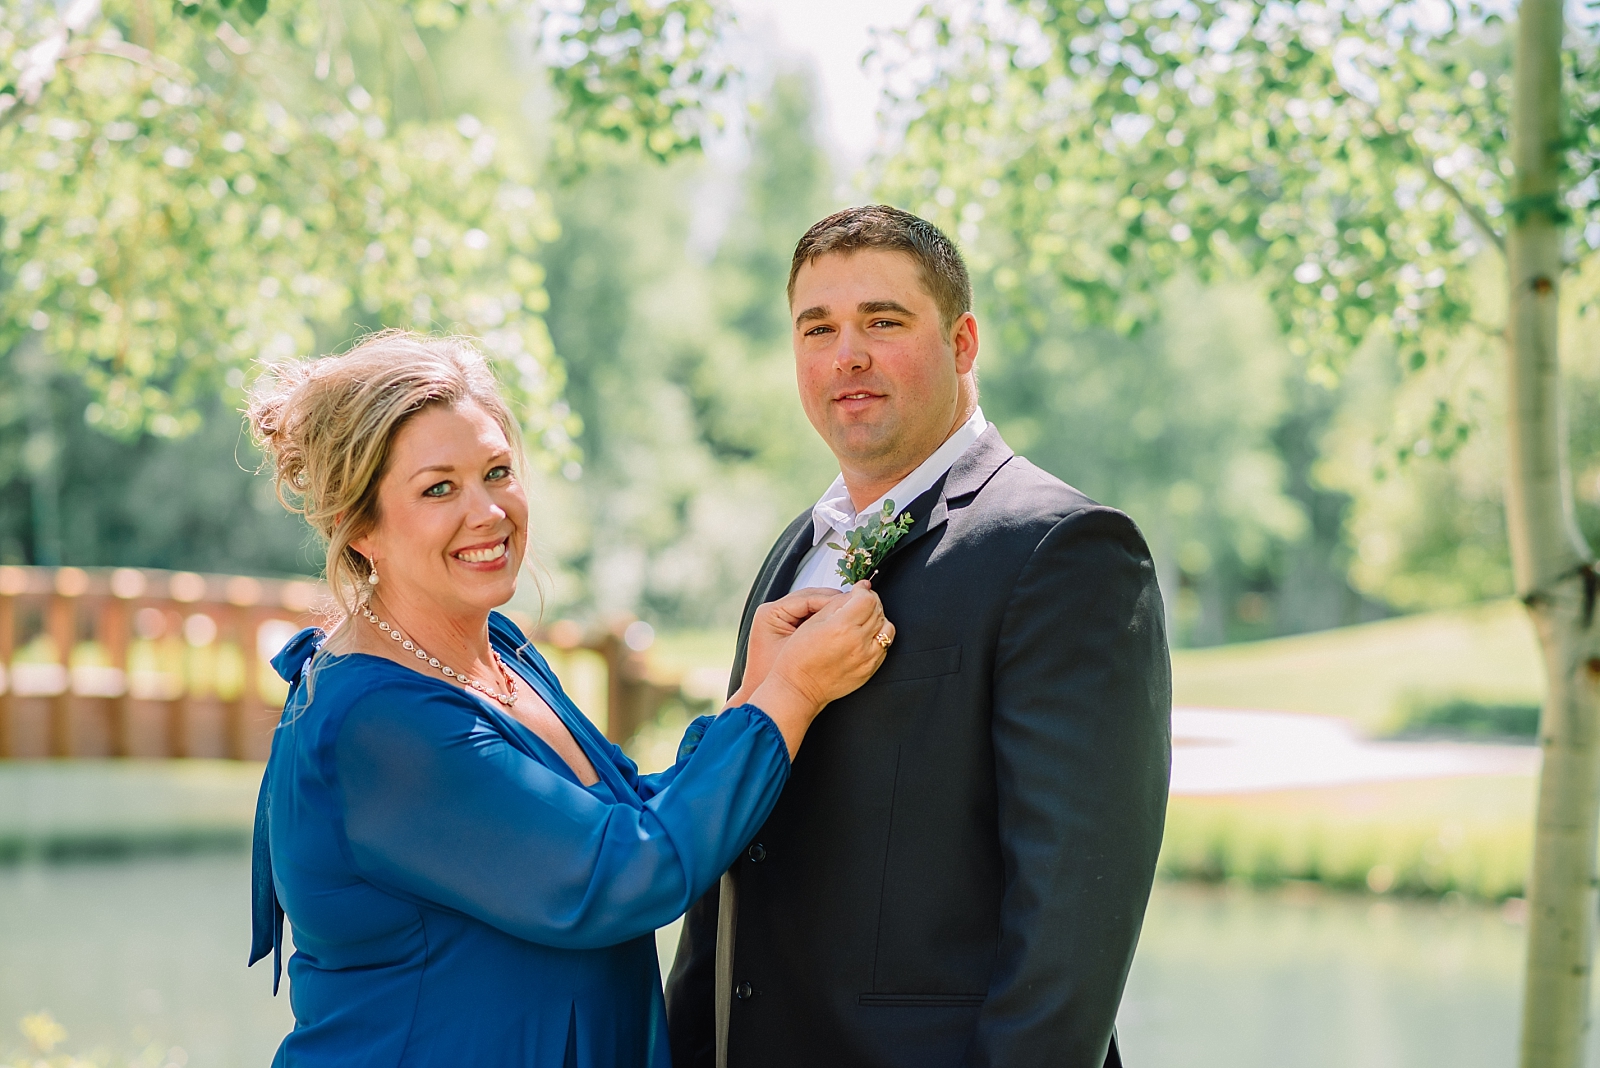 mother of the groom pinning on the groom's boutonniere